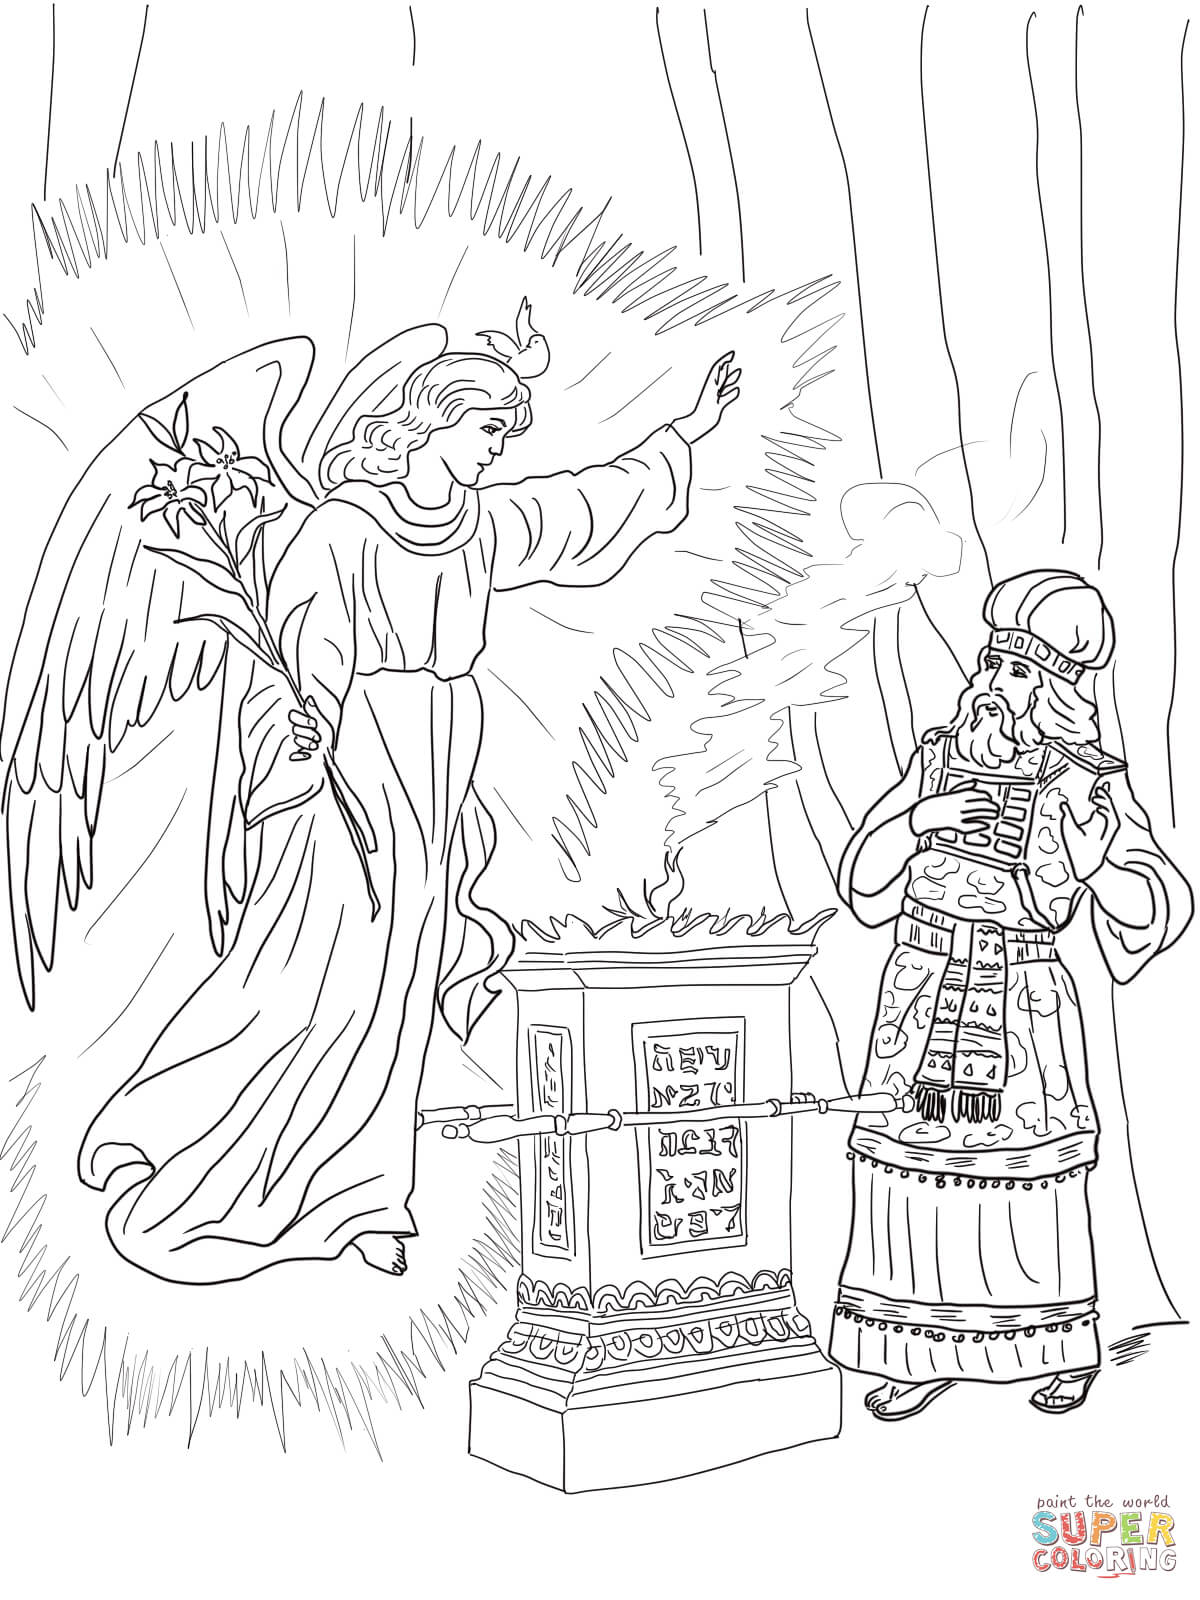 Angel Visits Zechariah coloring page | Free Printable Coloring Pages